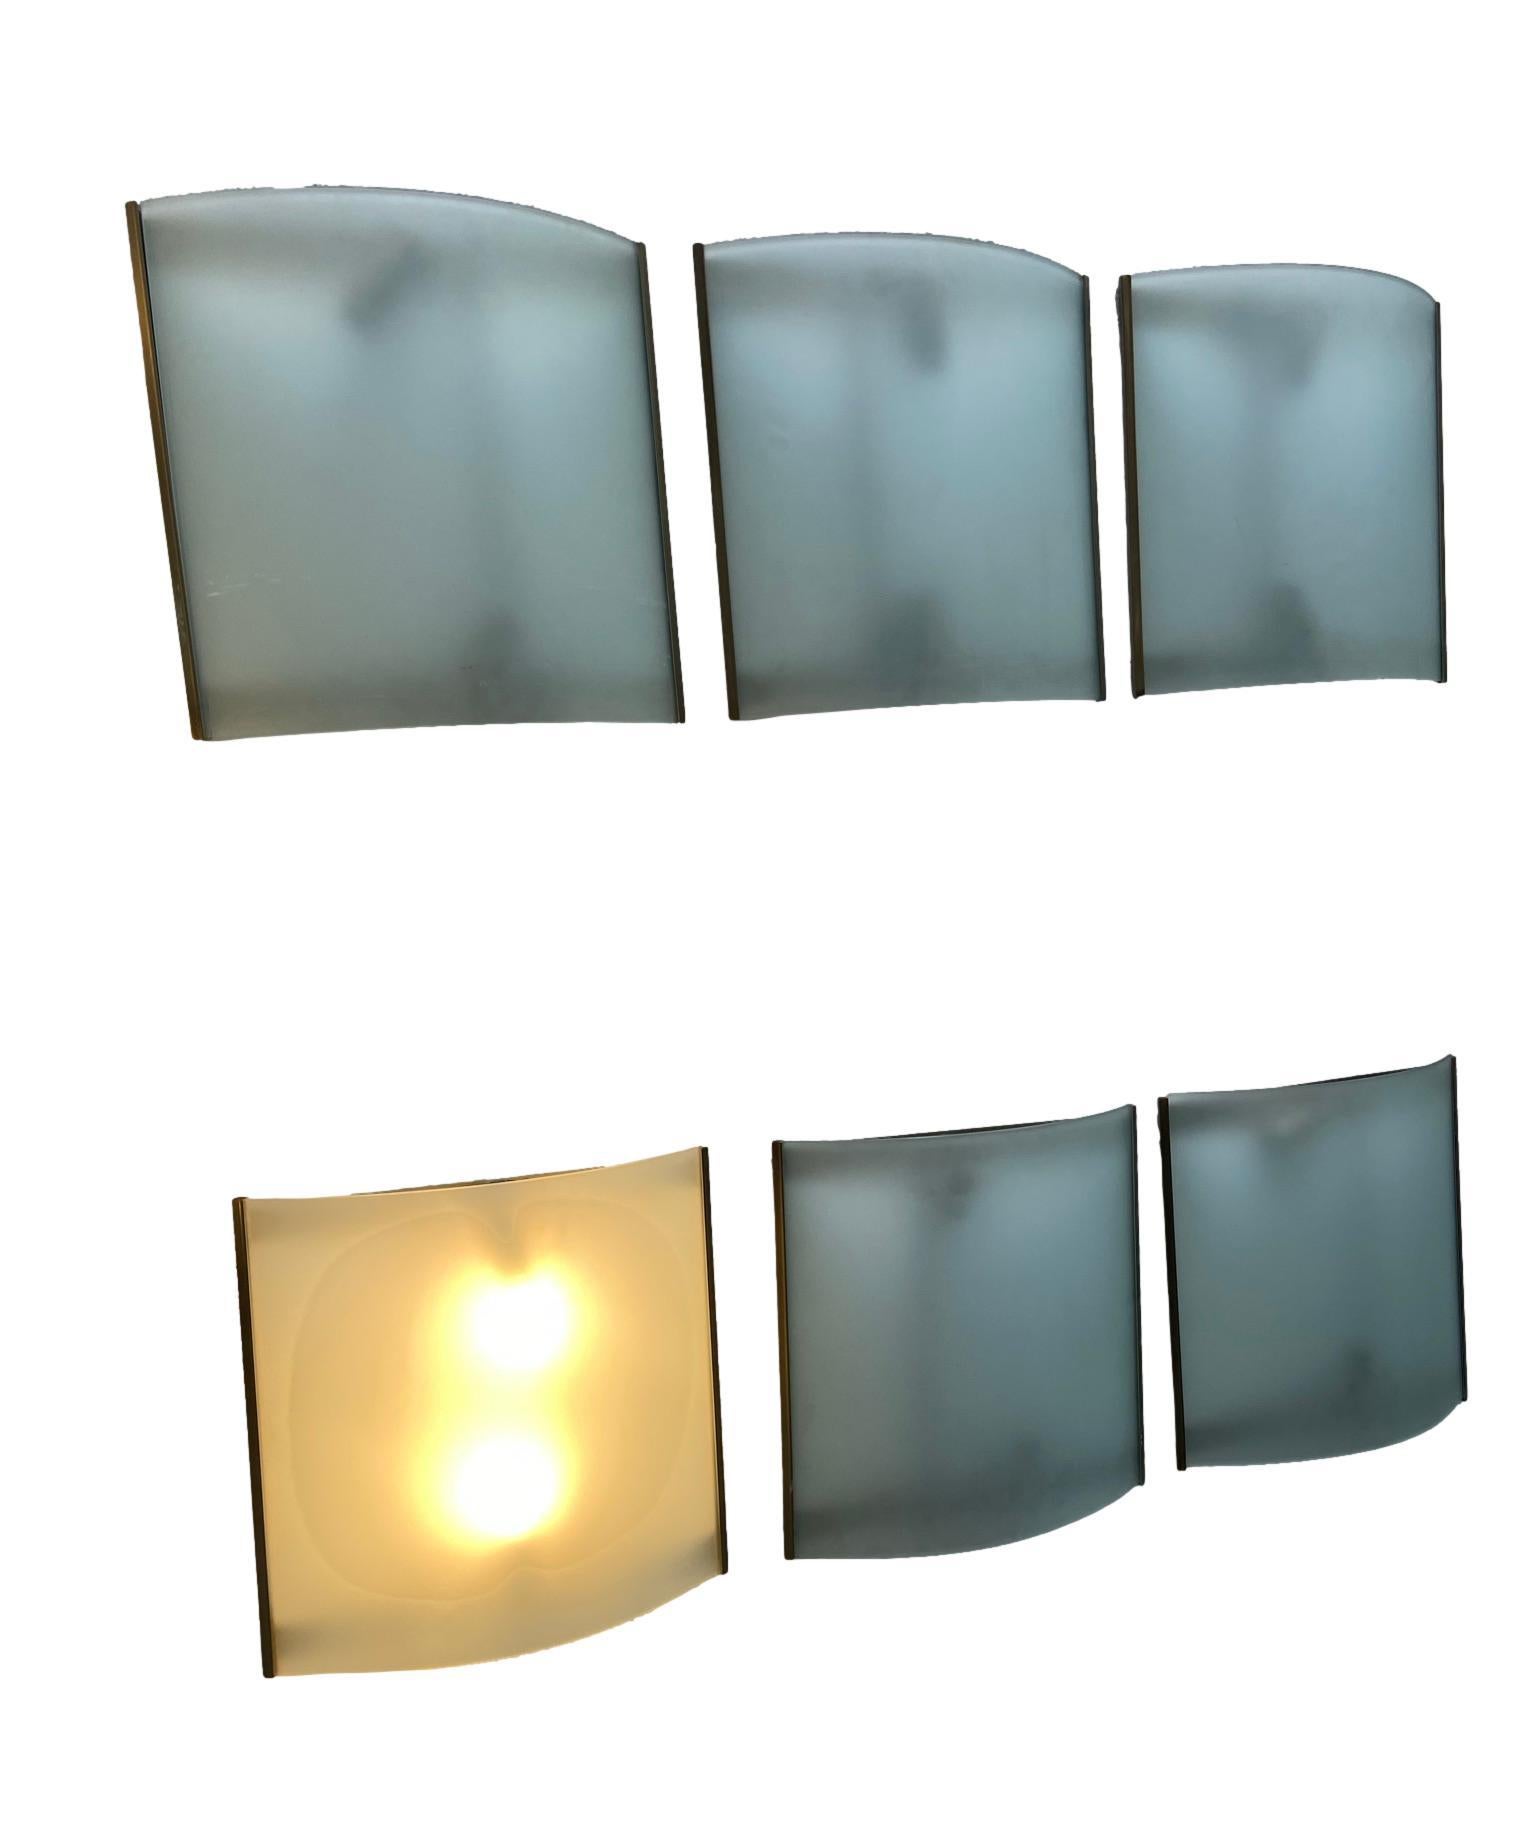 Fontana Arte Style Set of 9 Wall Lamps, Italy, 1960s For Sale 3